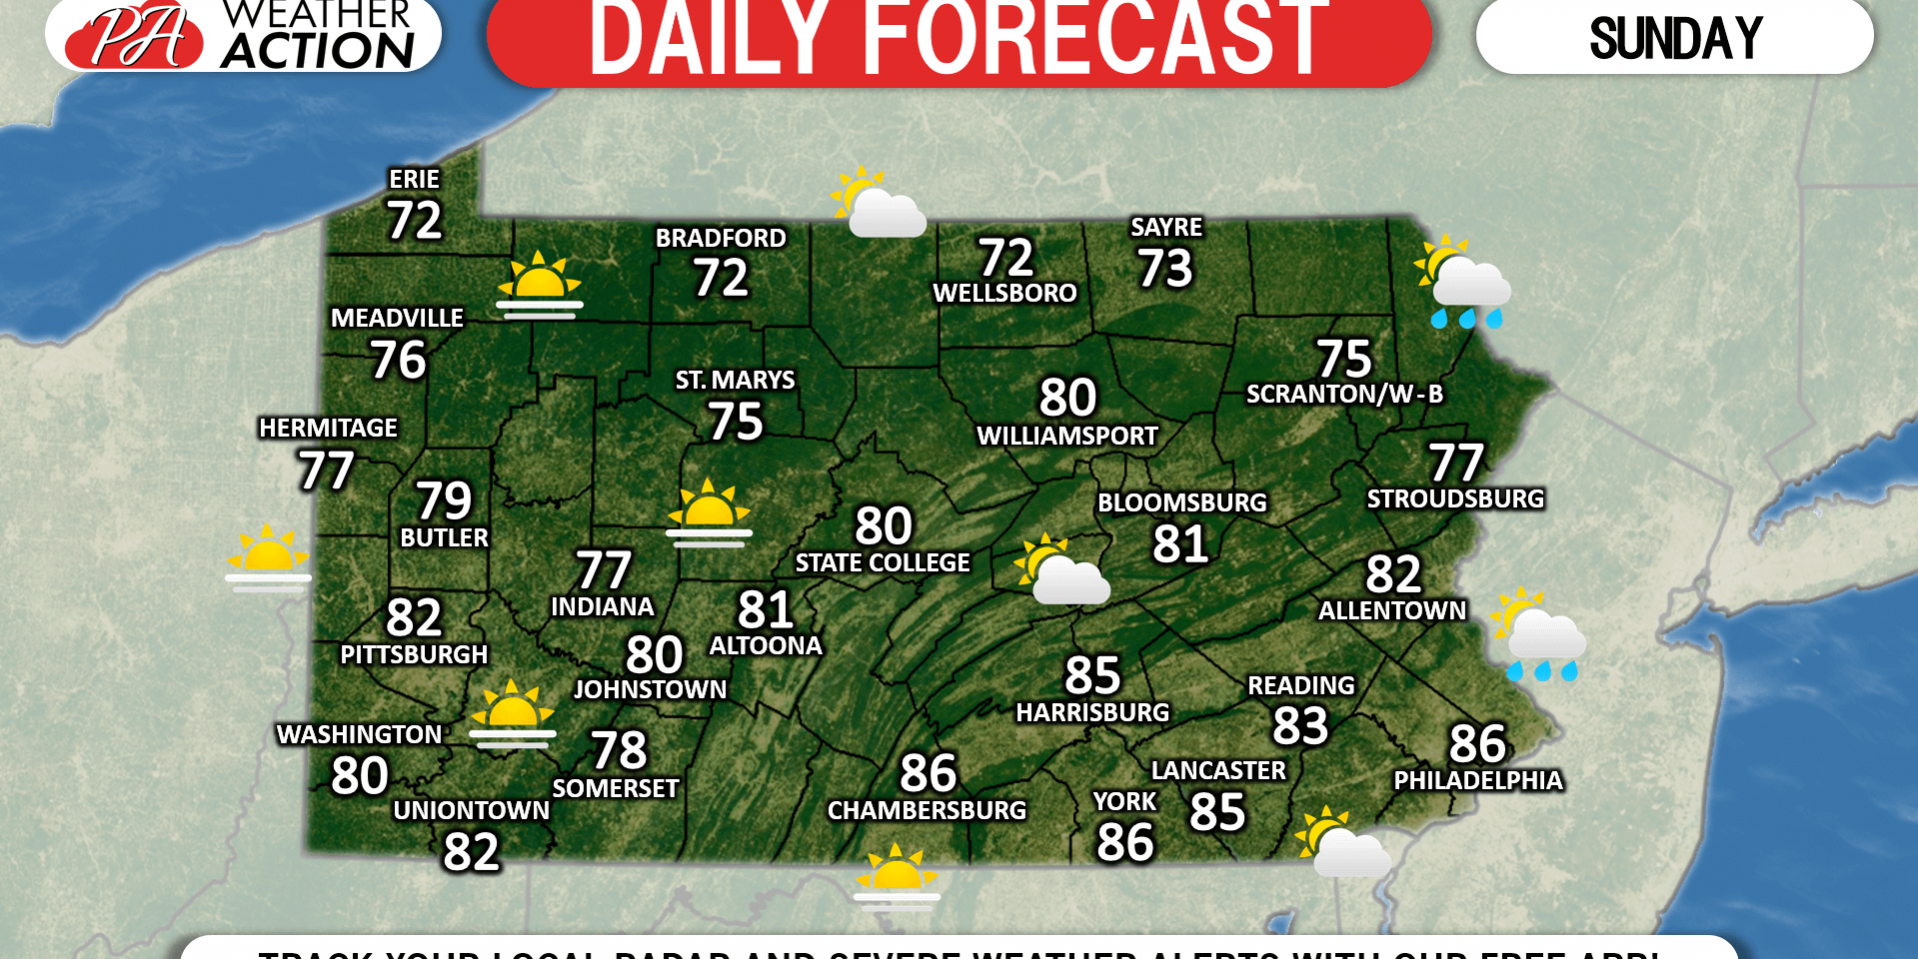 Daily Forecast for Sunday, June 30th, 2019 PA Weather Action